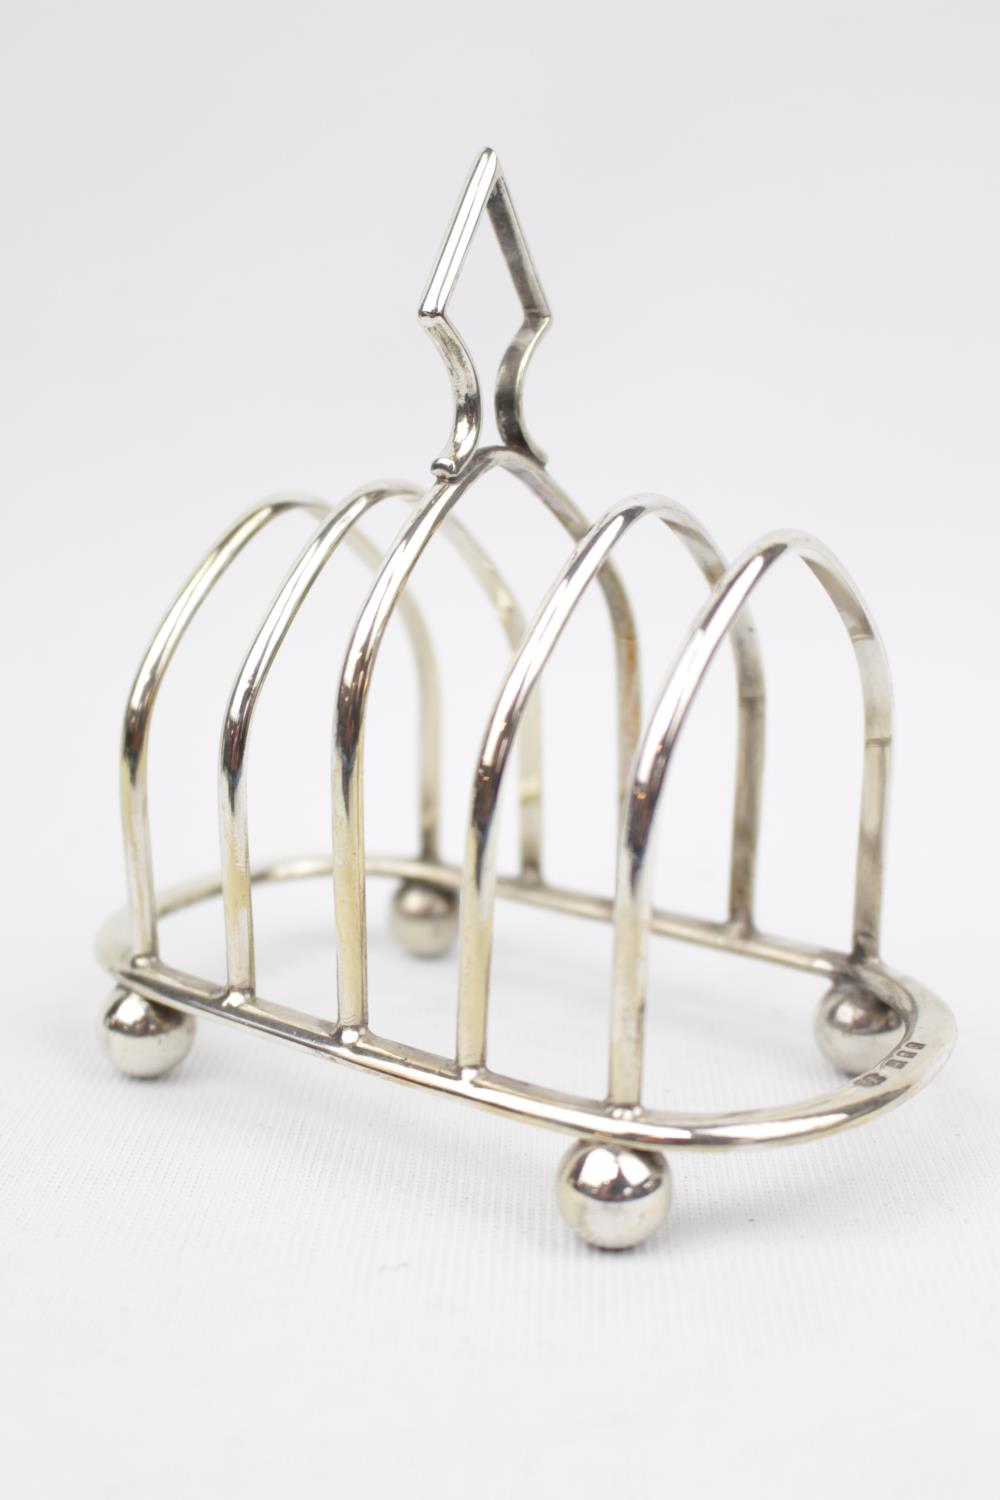 George V Silver Toast Rack of half oval arches by Robert Pringle & Sons, London 1929, 110g total